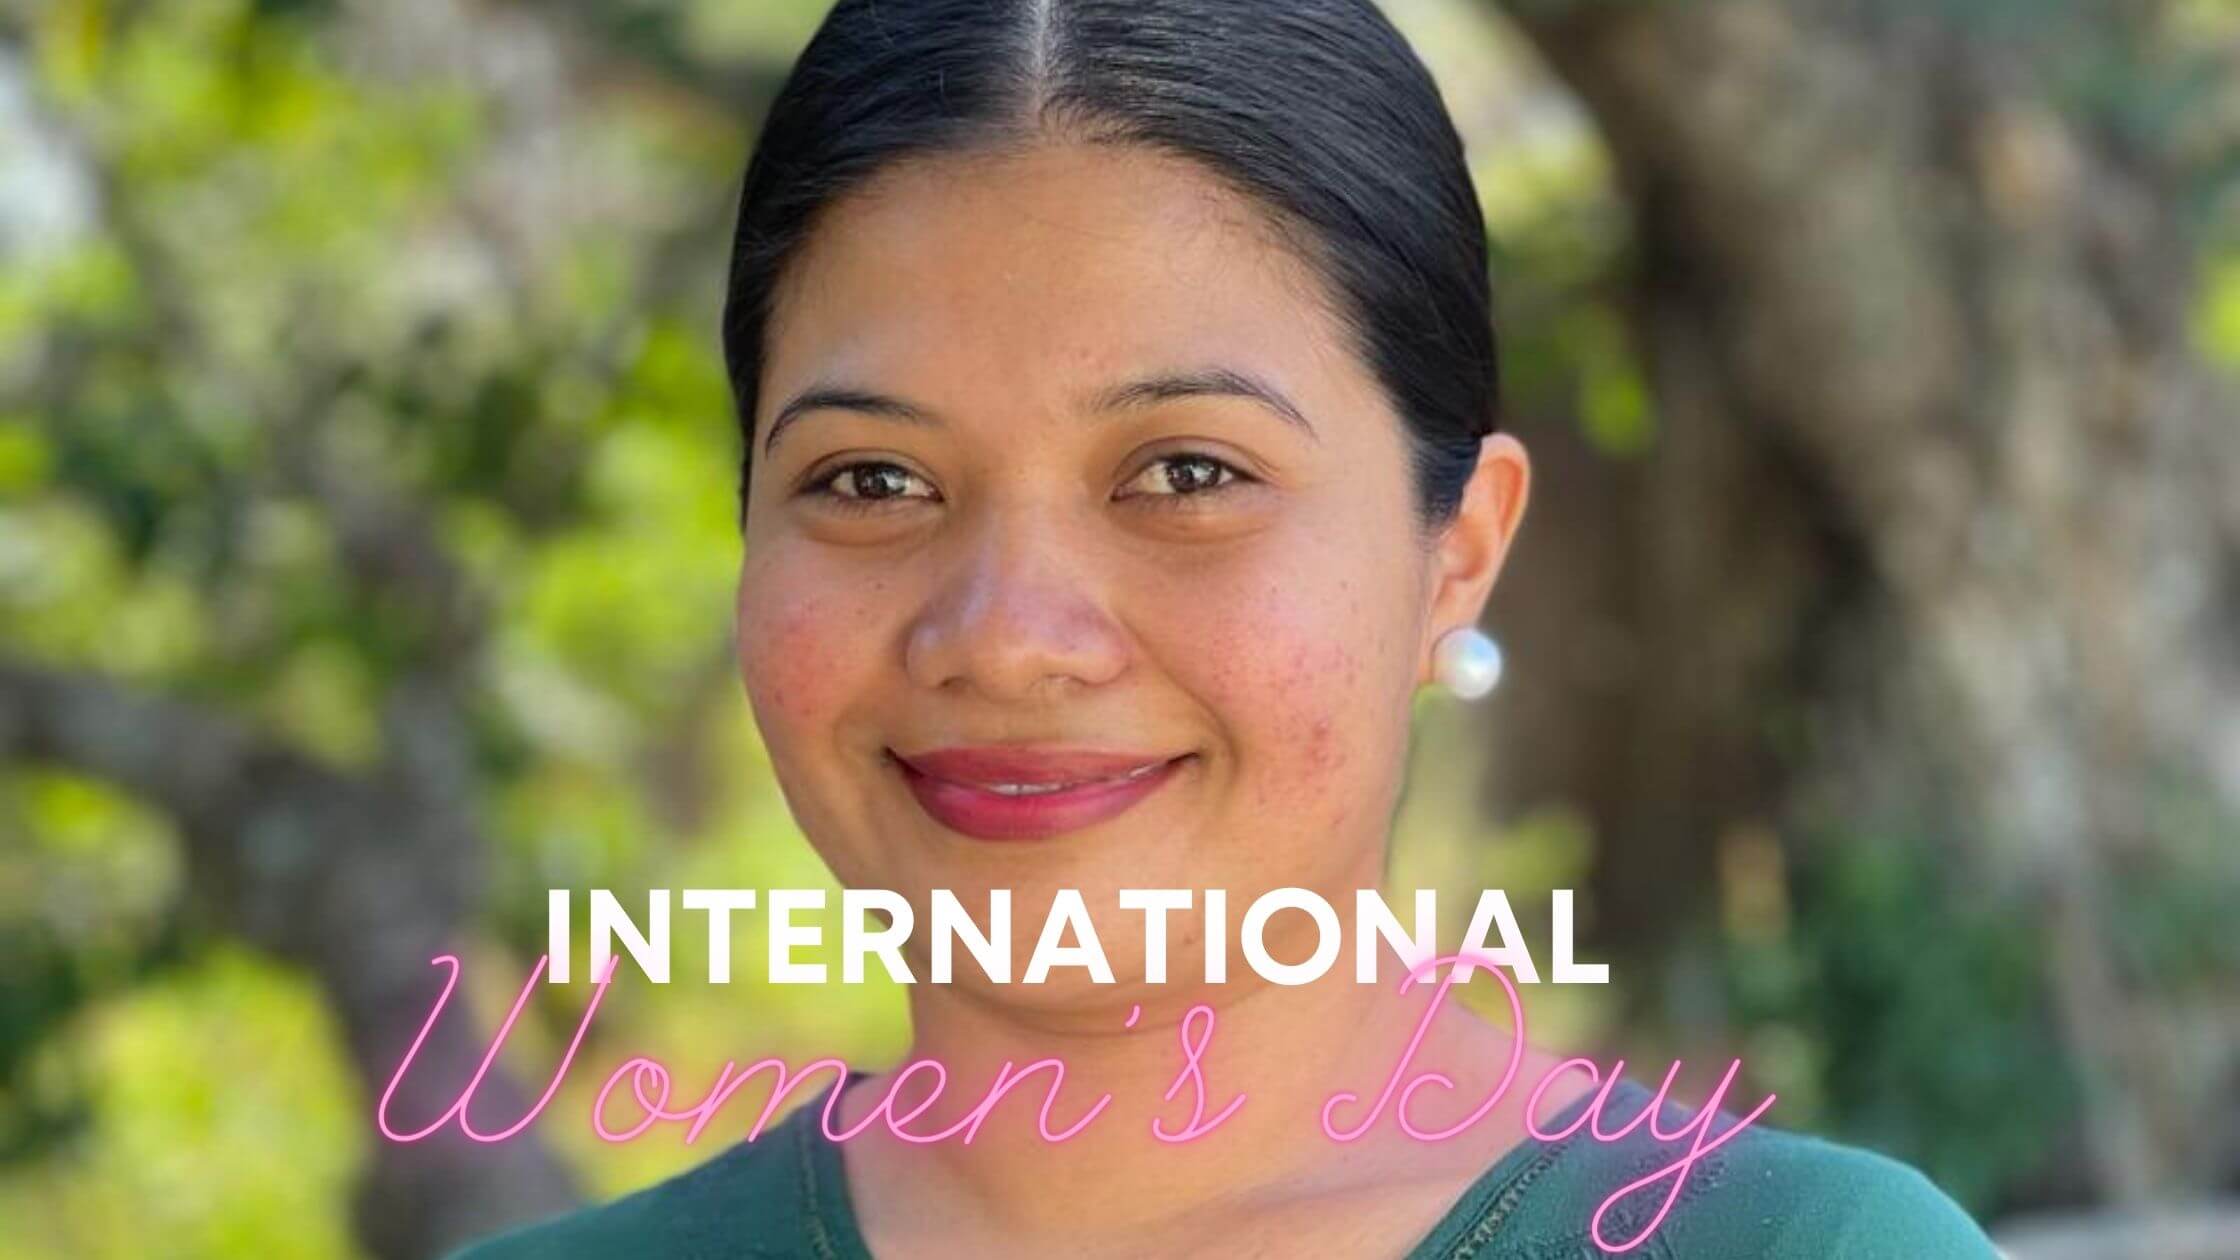 Celebrate International Women’s Day: 4 Portraits of Empowerment and Hope